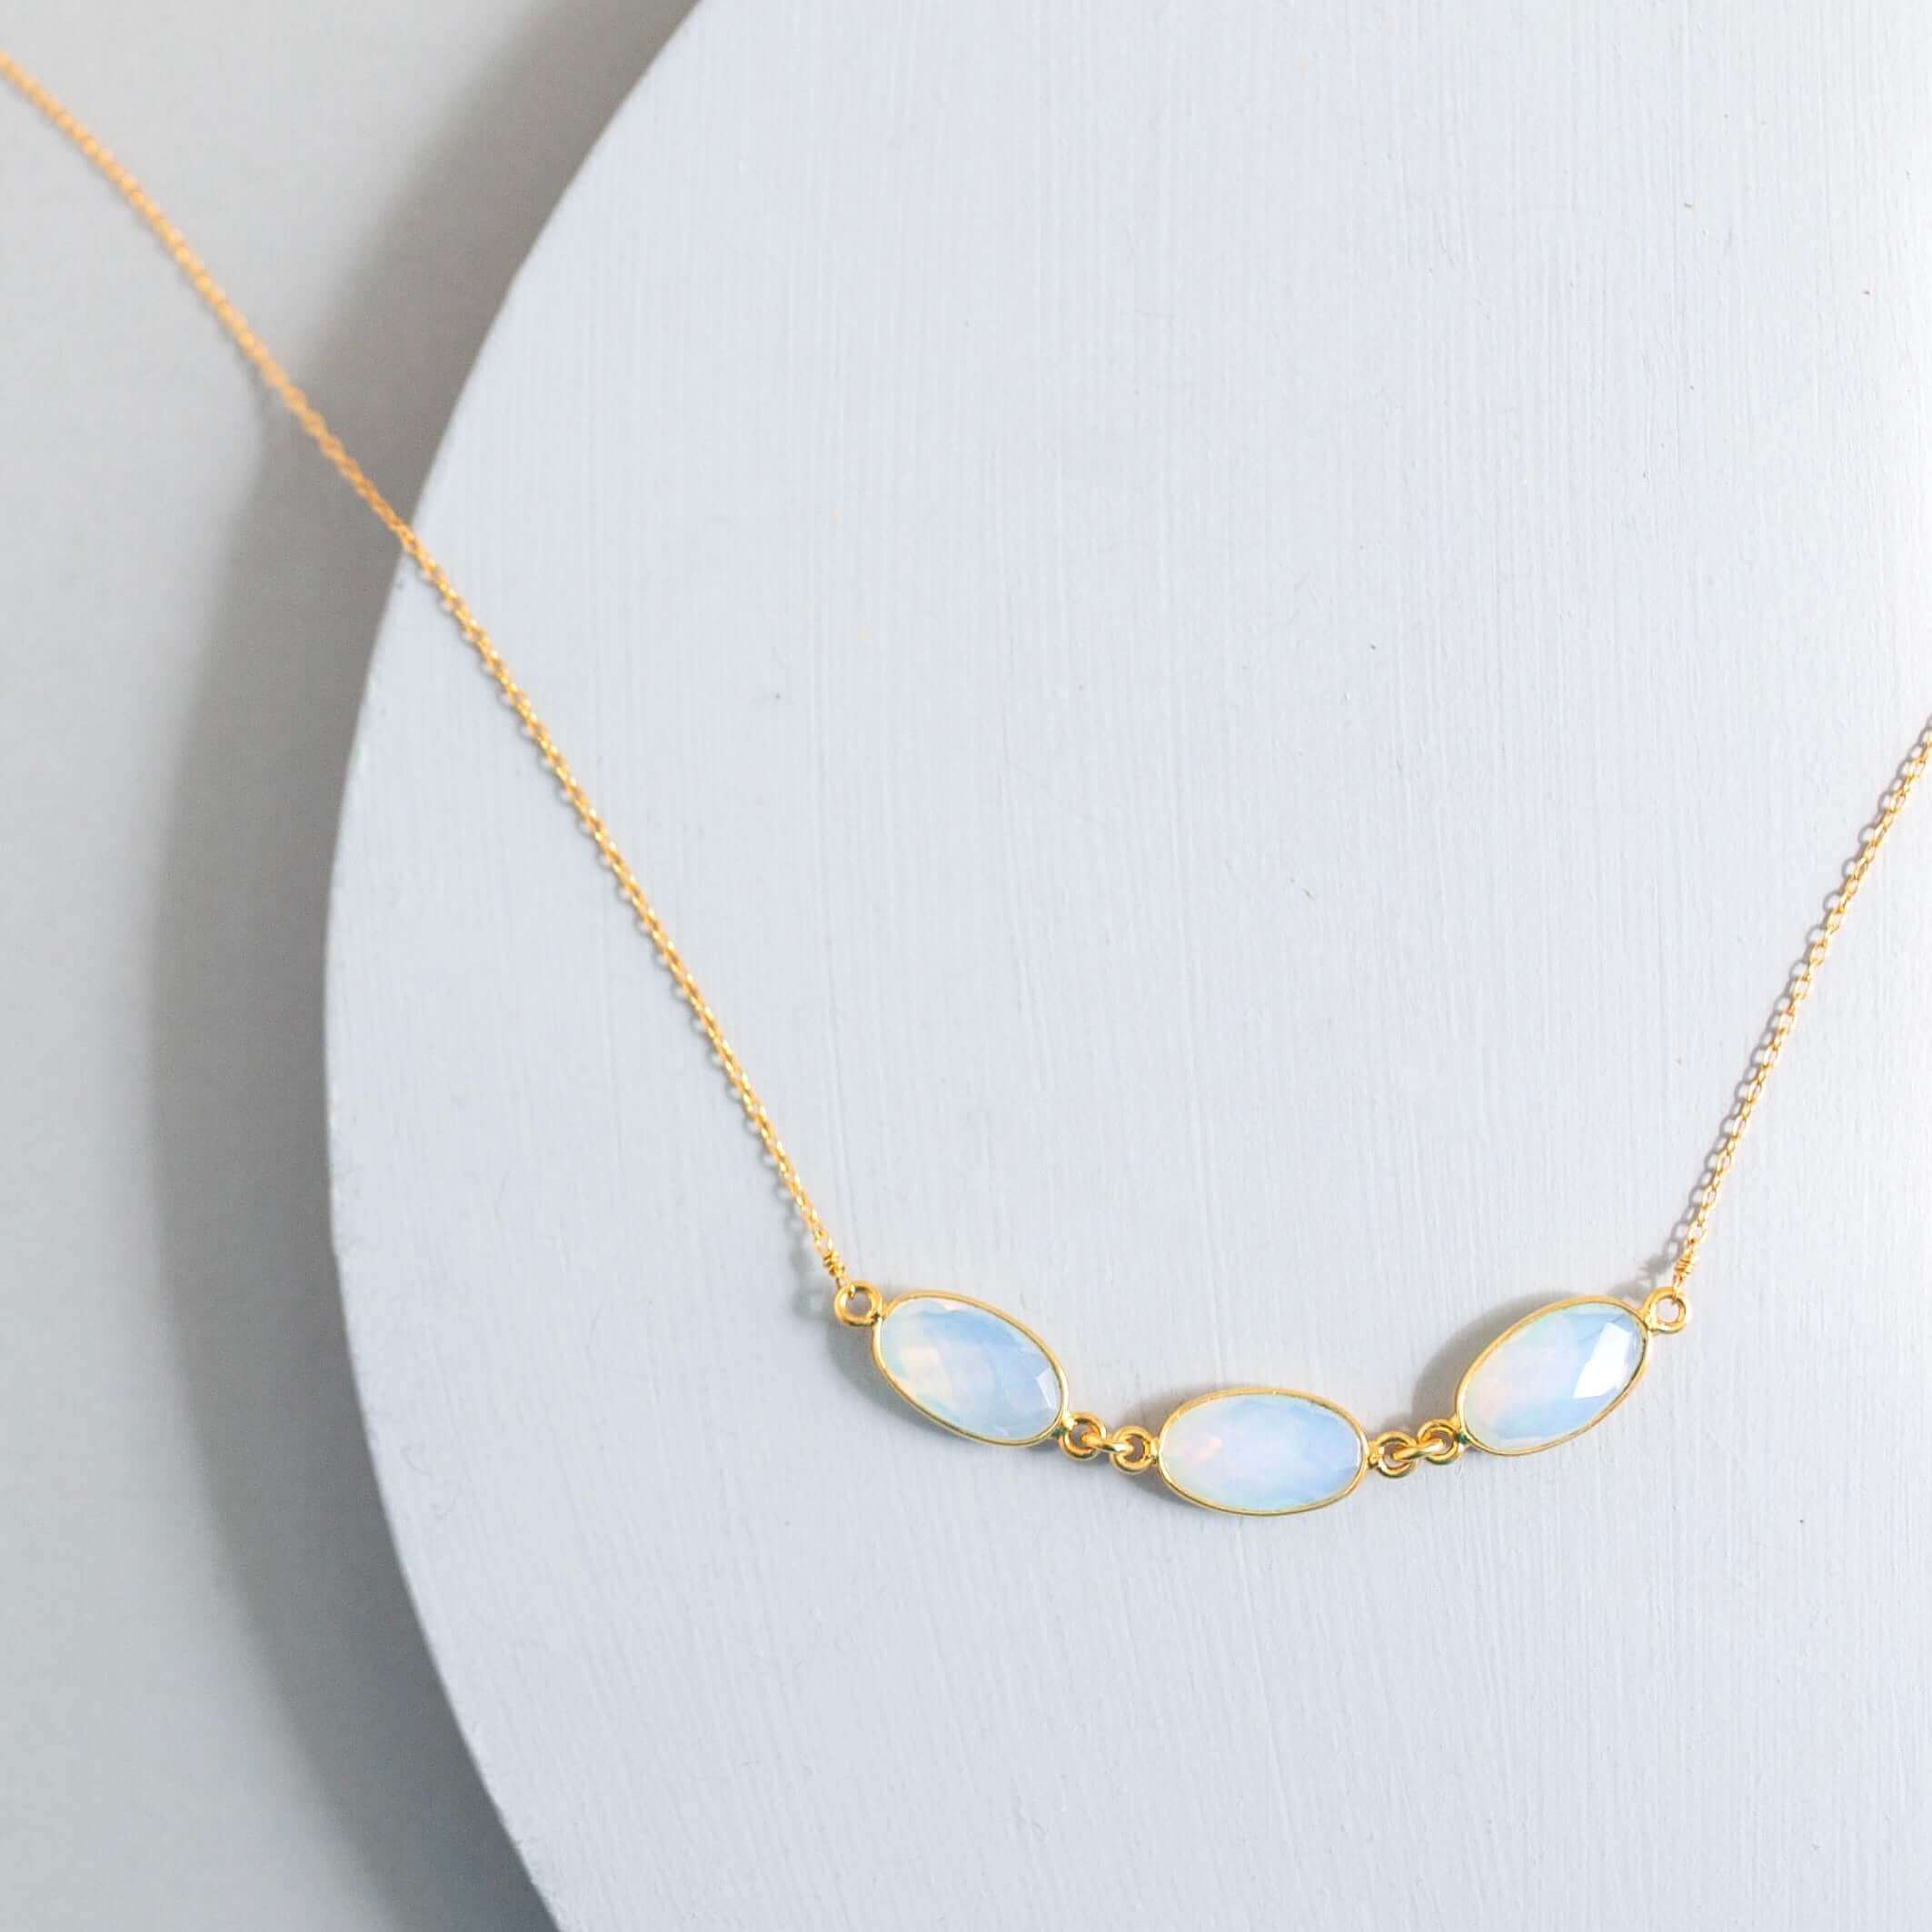 Gold Chic and easy everyday necklace with three bezel-set opal quartz gemstones 